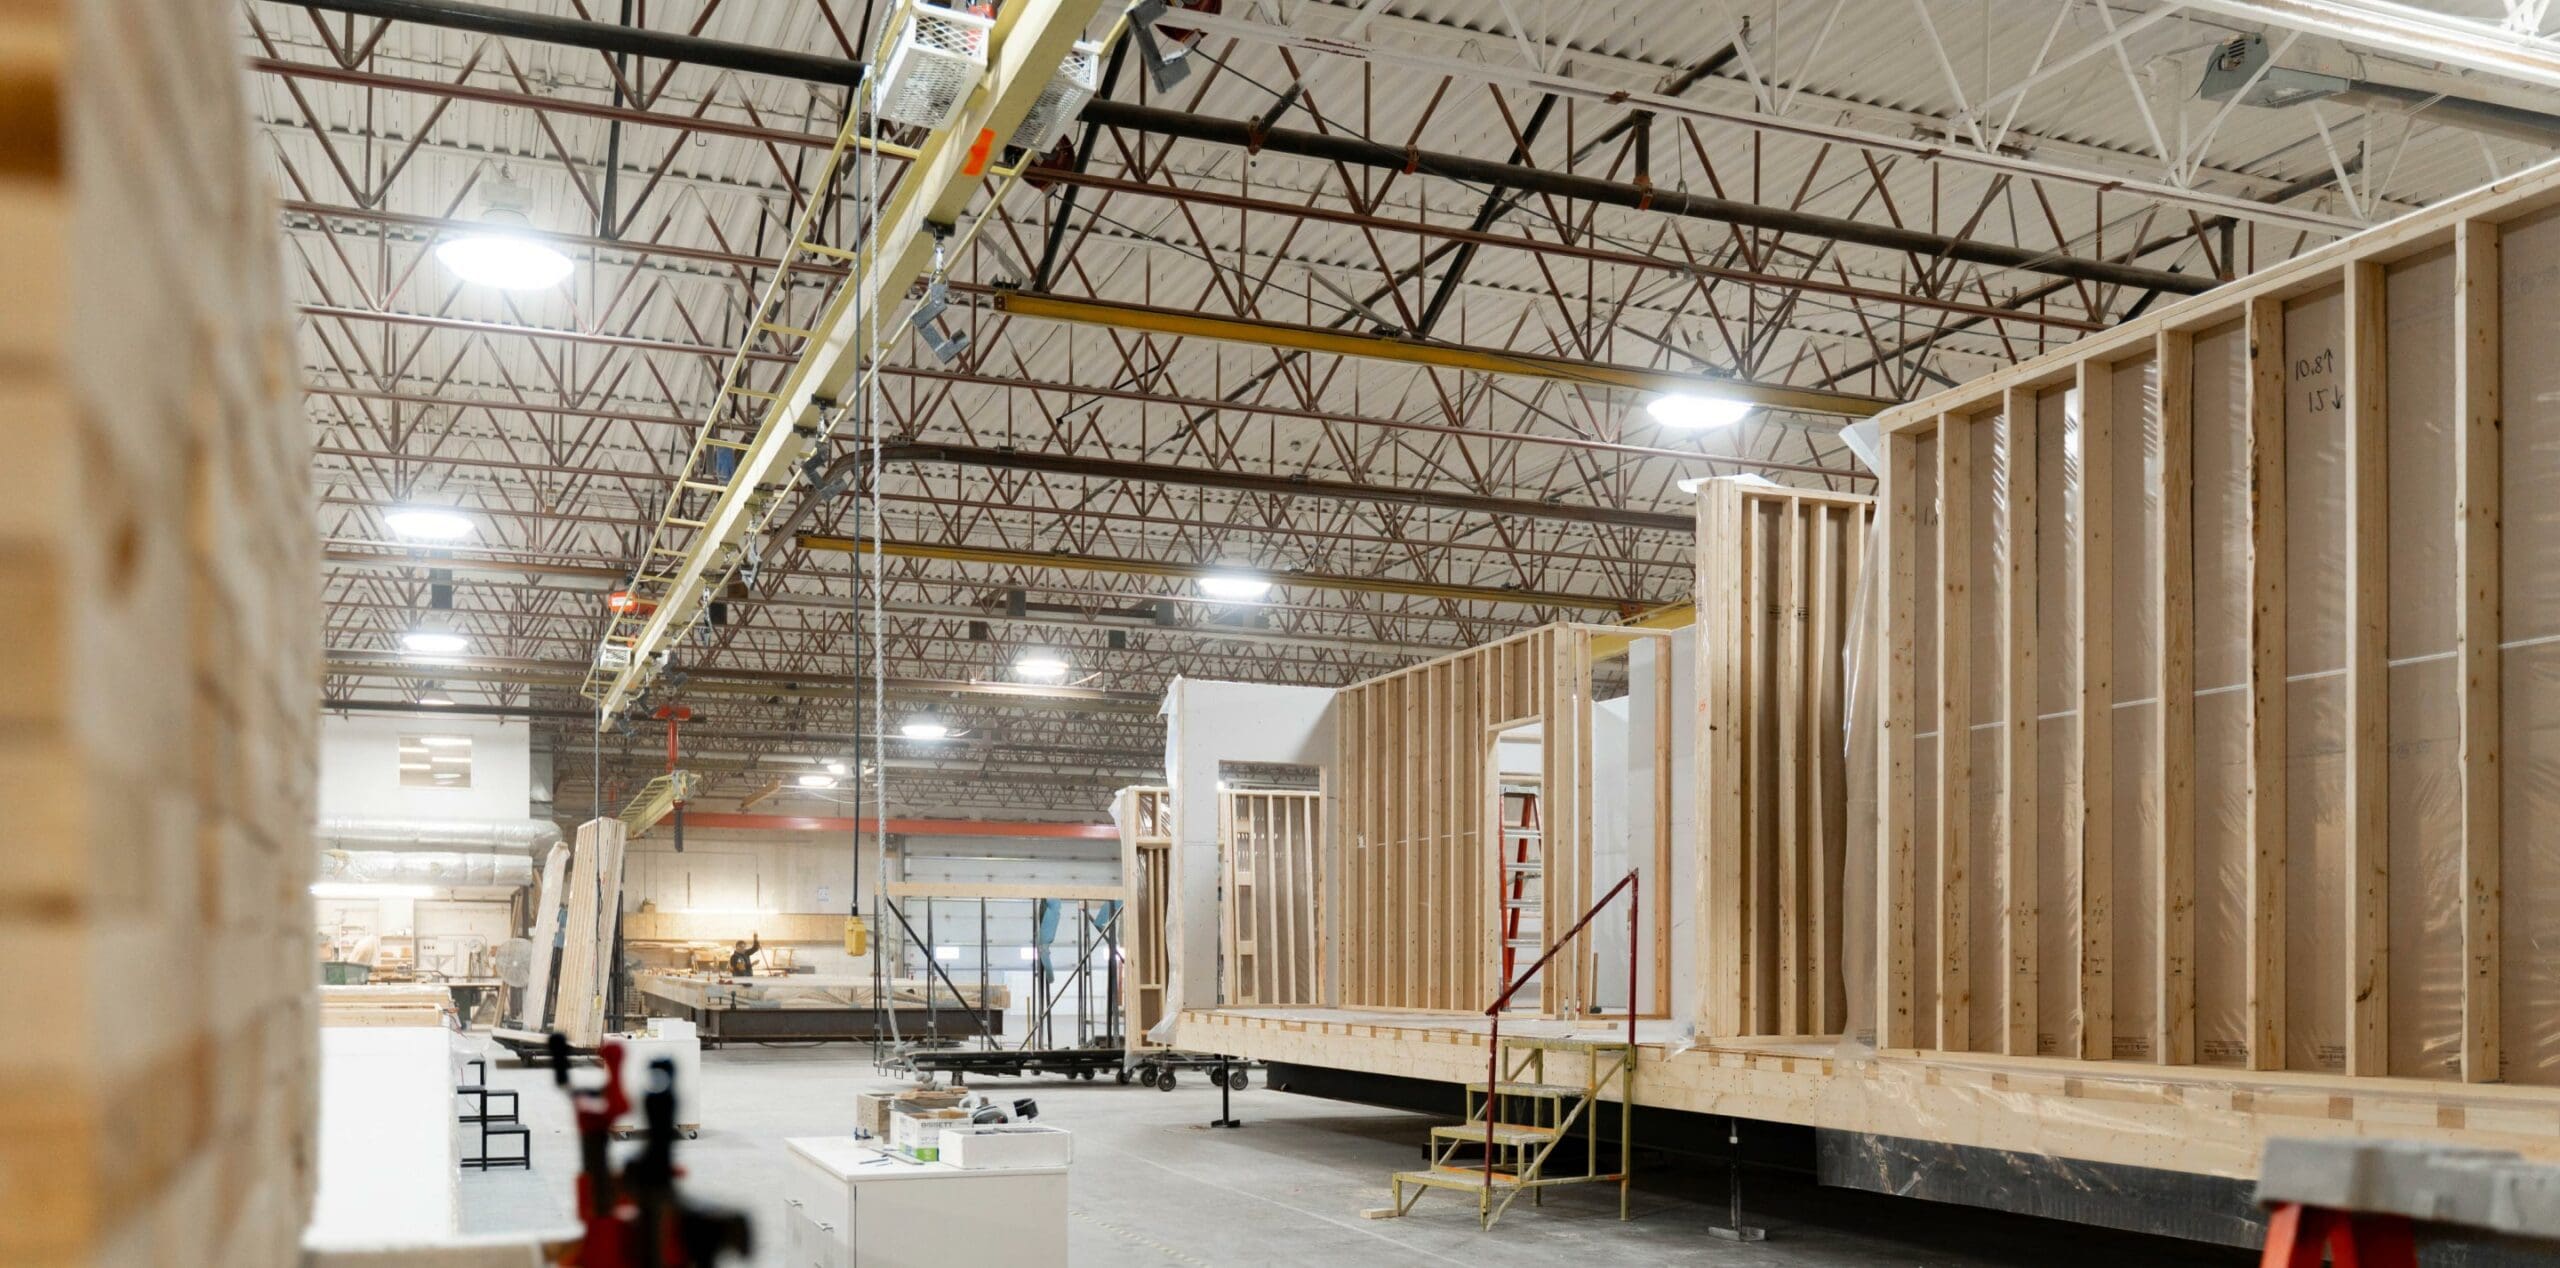 the interior of a modular housing facility that shows frames of homes in different stages of production